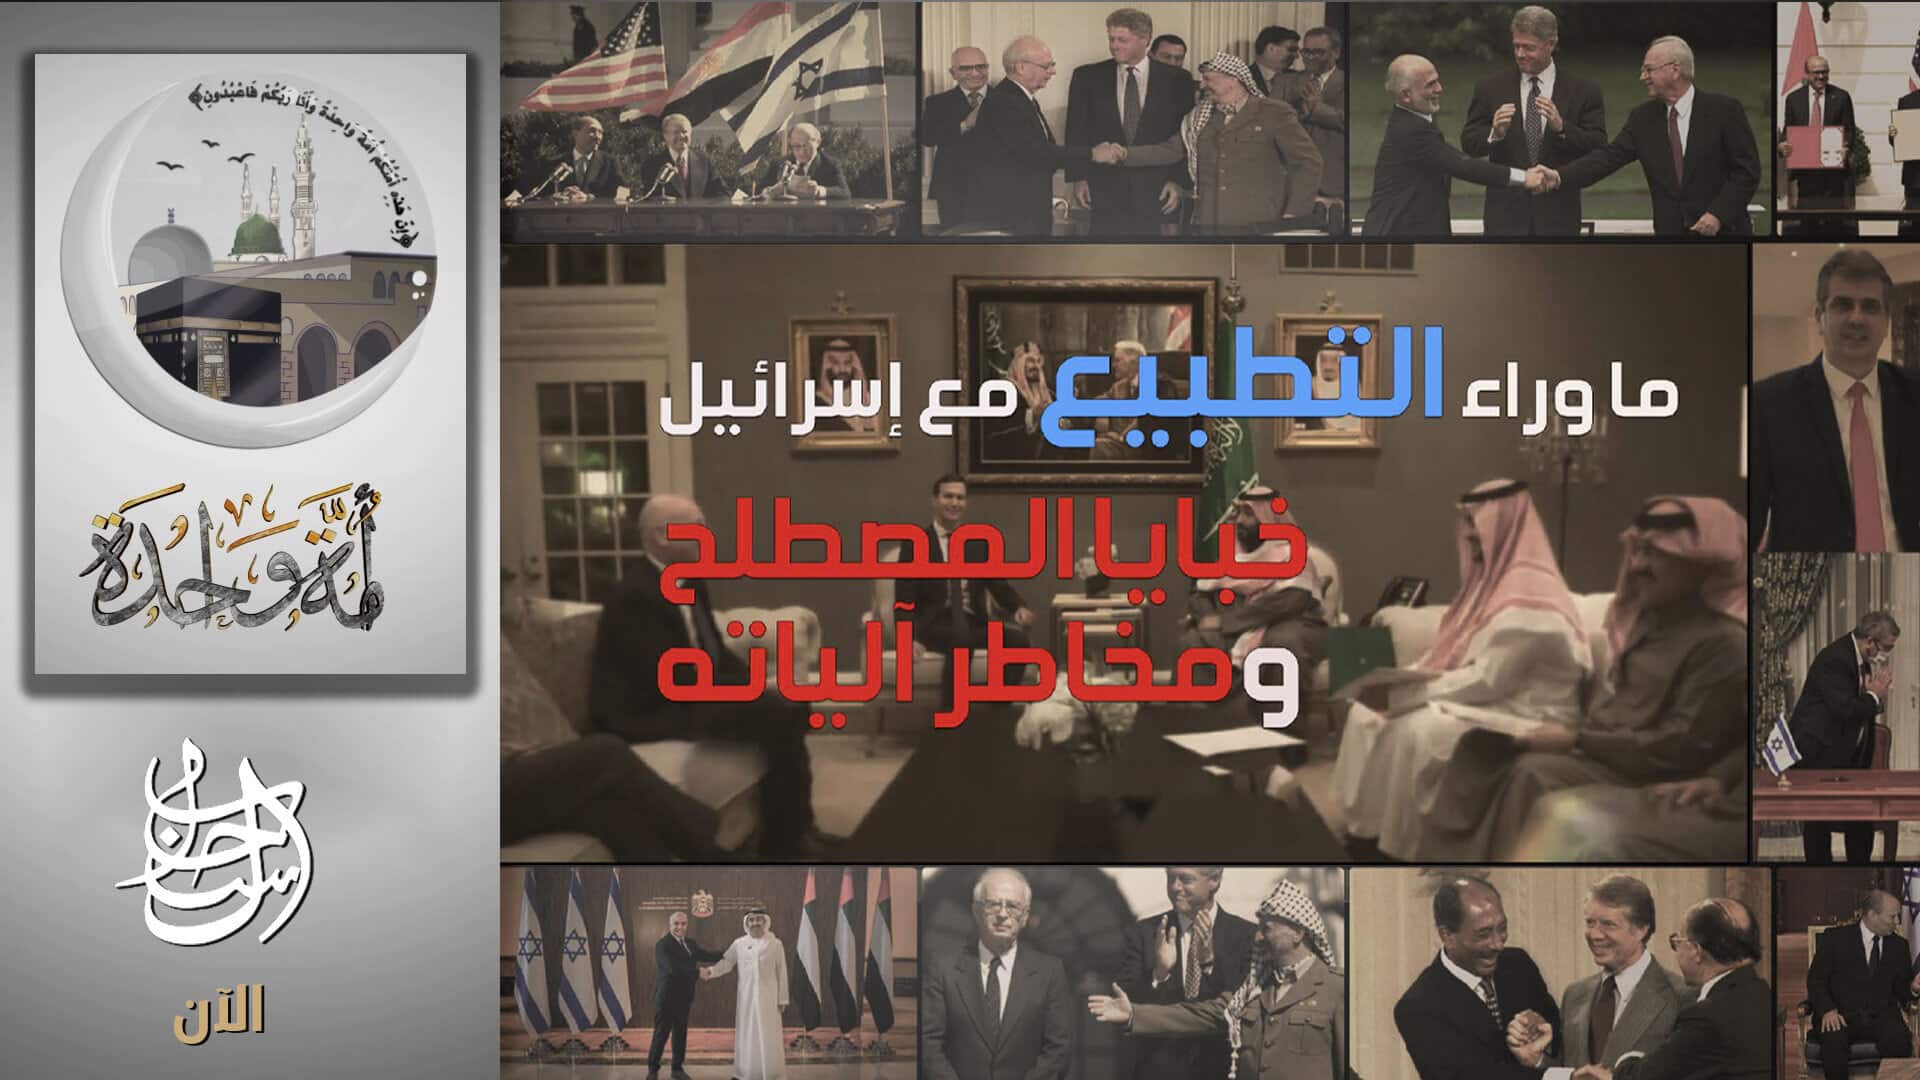 (Video) as-Sahab Media (al-Qaeda Central Command / AQC): "Beyond Normalization With Israel: The Dangers of the Notion's Mechanisms" - 14 February 2023